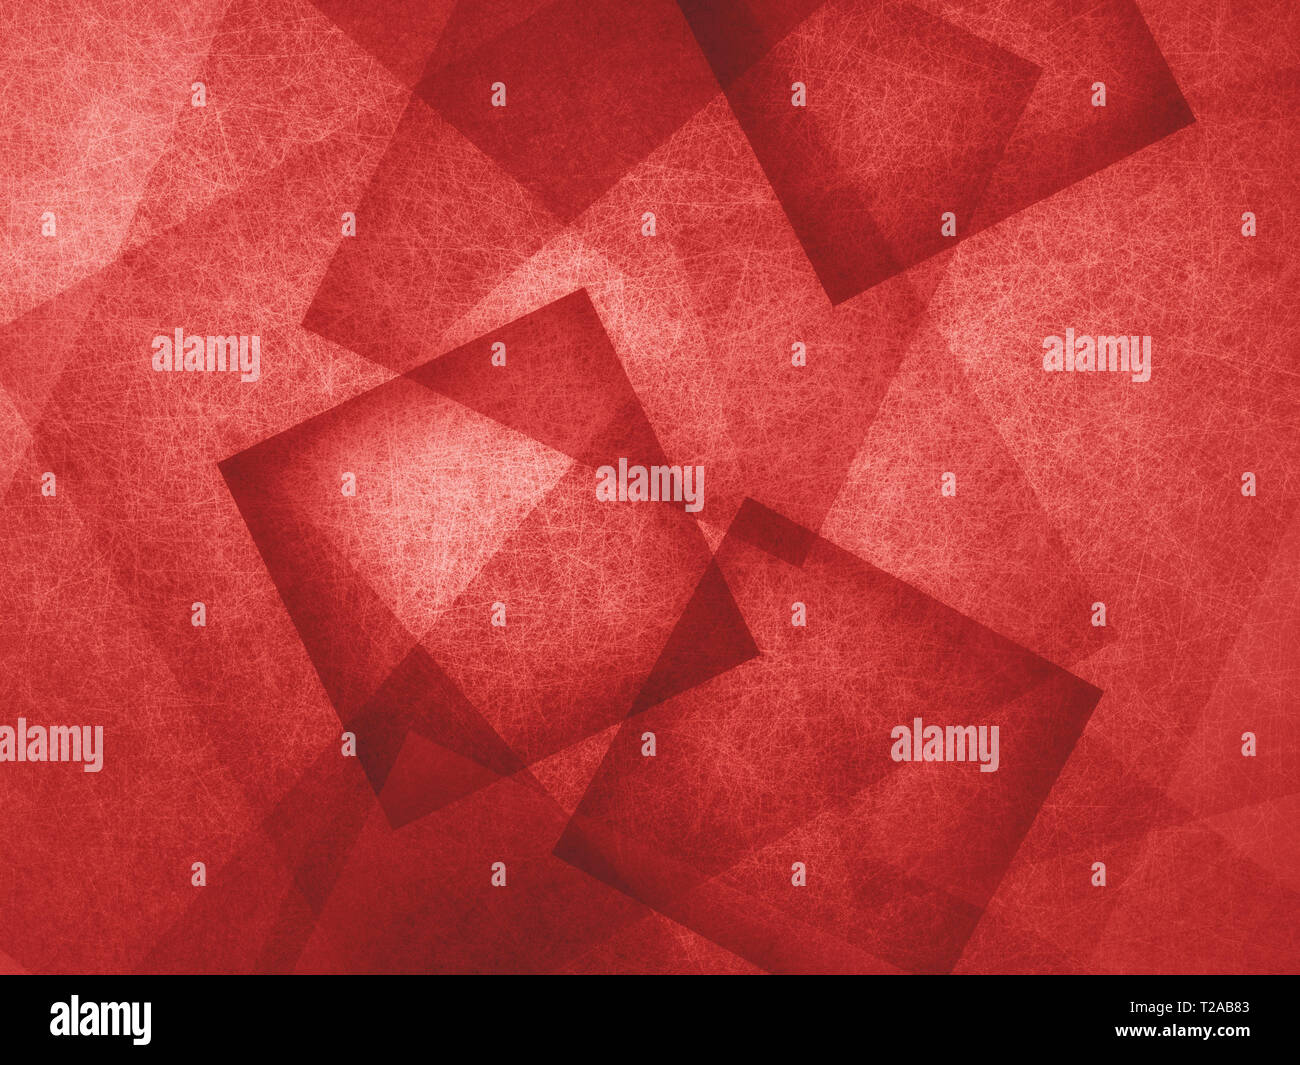 abstract red background with geometric design, layers of intersecting angles, transparent rectangles diamonds and squares floating in random pattern Stock Photo